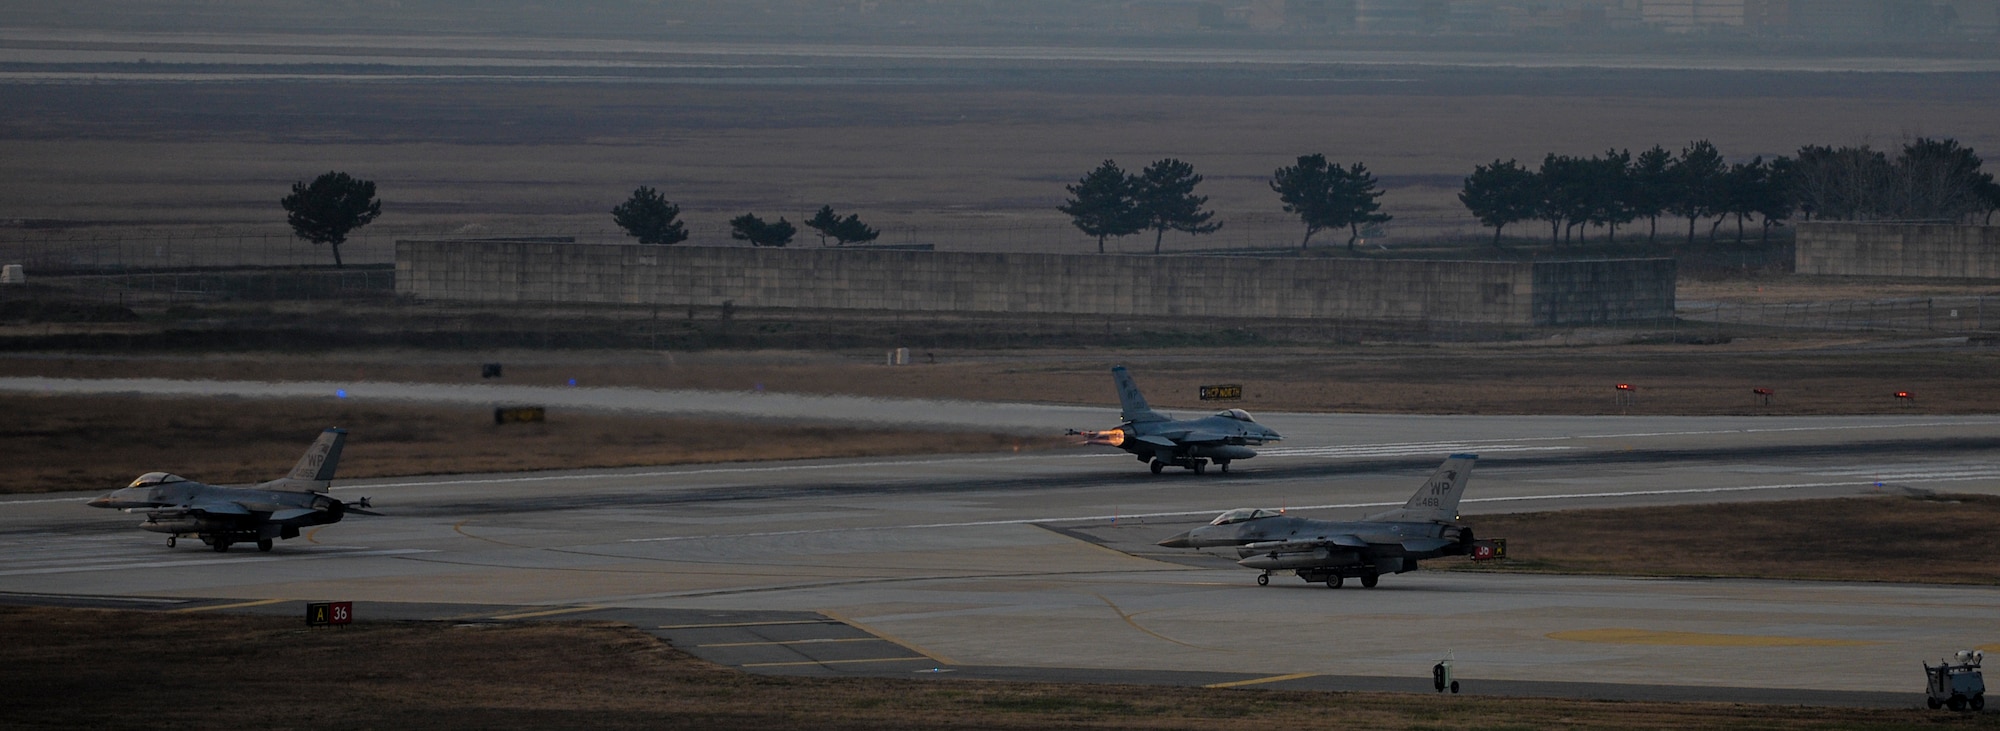 U.S. Air Force F-16 Fighting Falcons from the 35th Fighter Squadron prepare to take off at Kunsan Air Base, Republic of Korea, Dec. 3, 2016. Aircrews here regularly train alongside aircrews flying different types of aircraft. This interoperability enables our members to be ready for many potential situations. (U.S. Air Force photo by Senior Airman Colville McFee/Released)